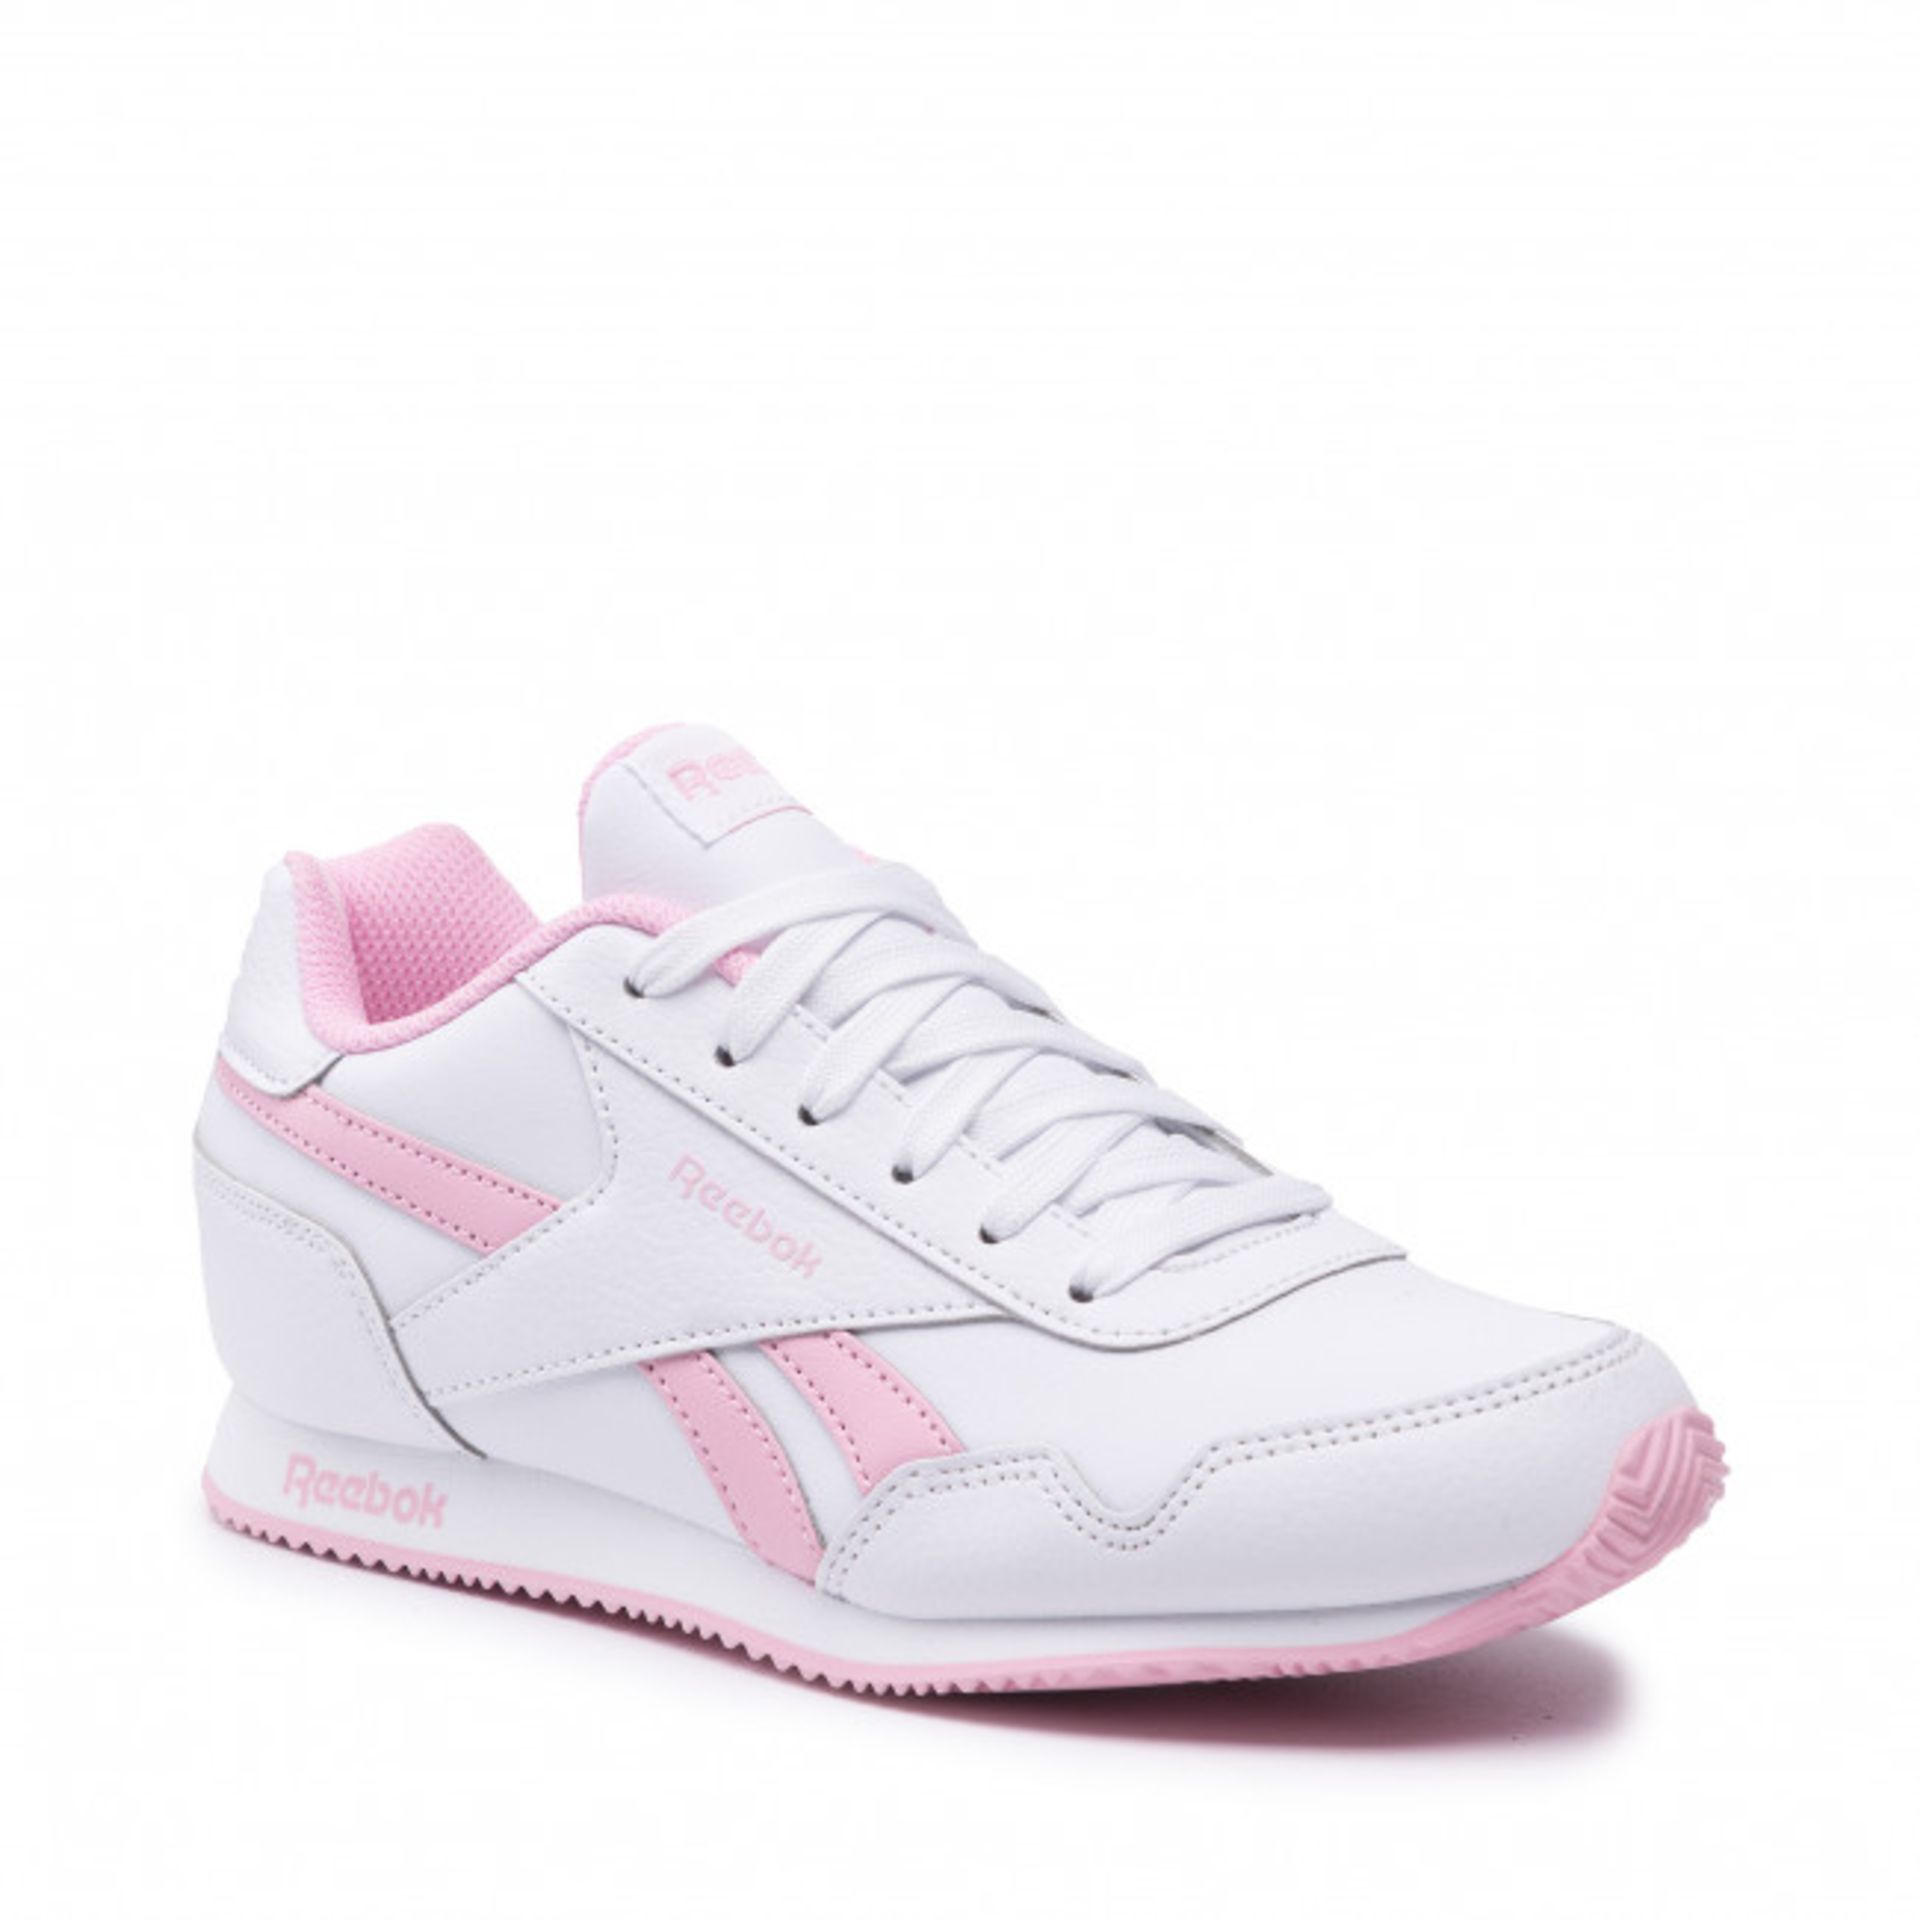 Brand New still sealed Reebok pink & white trainers size 3